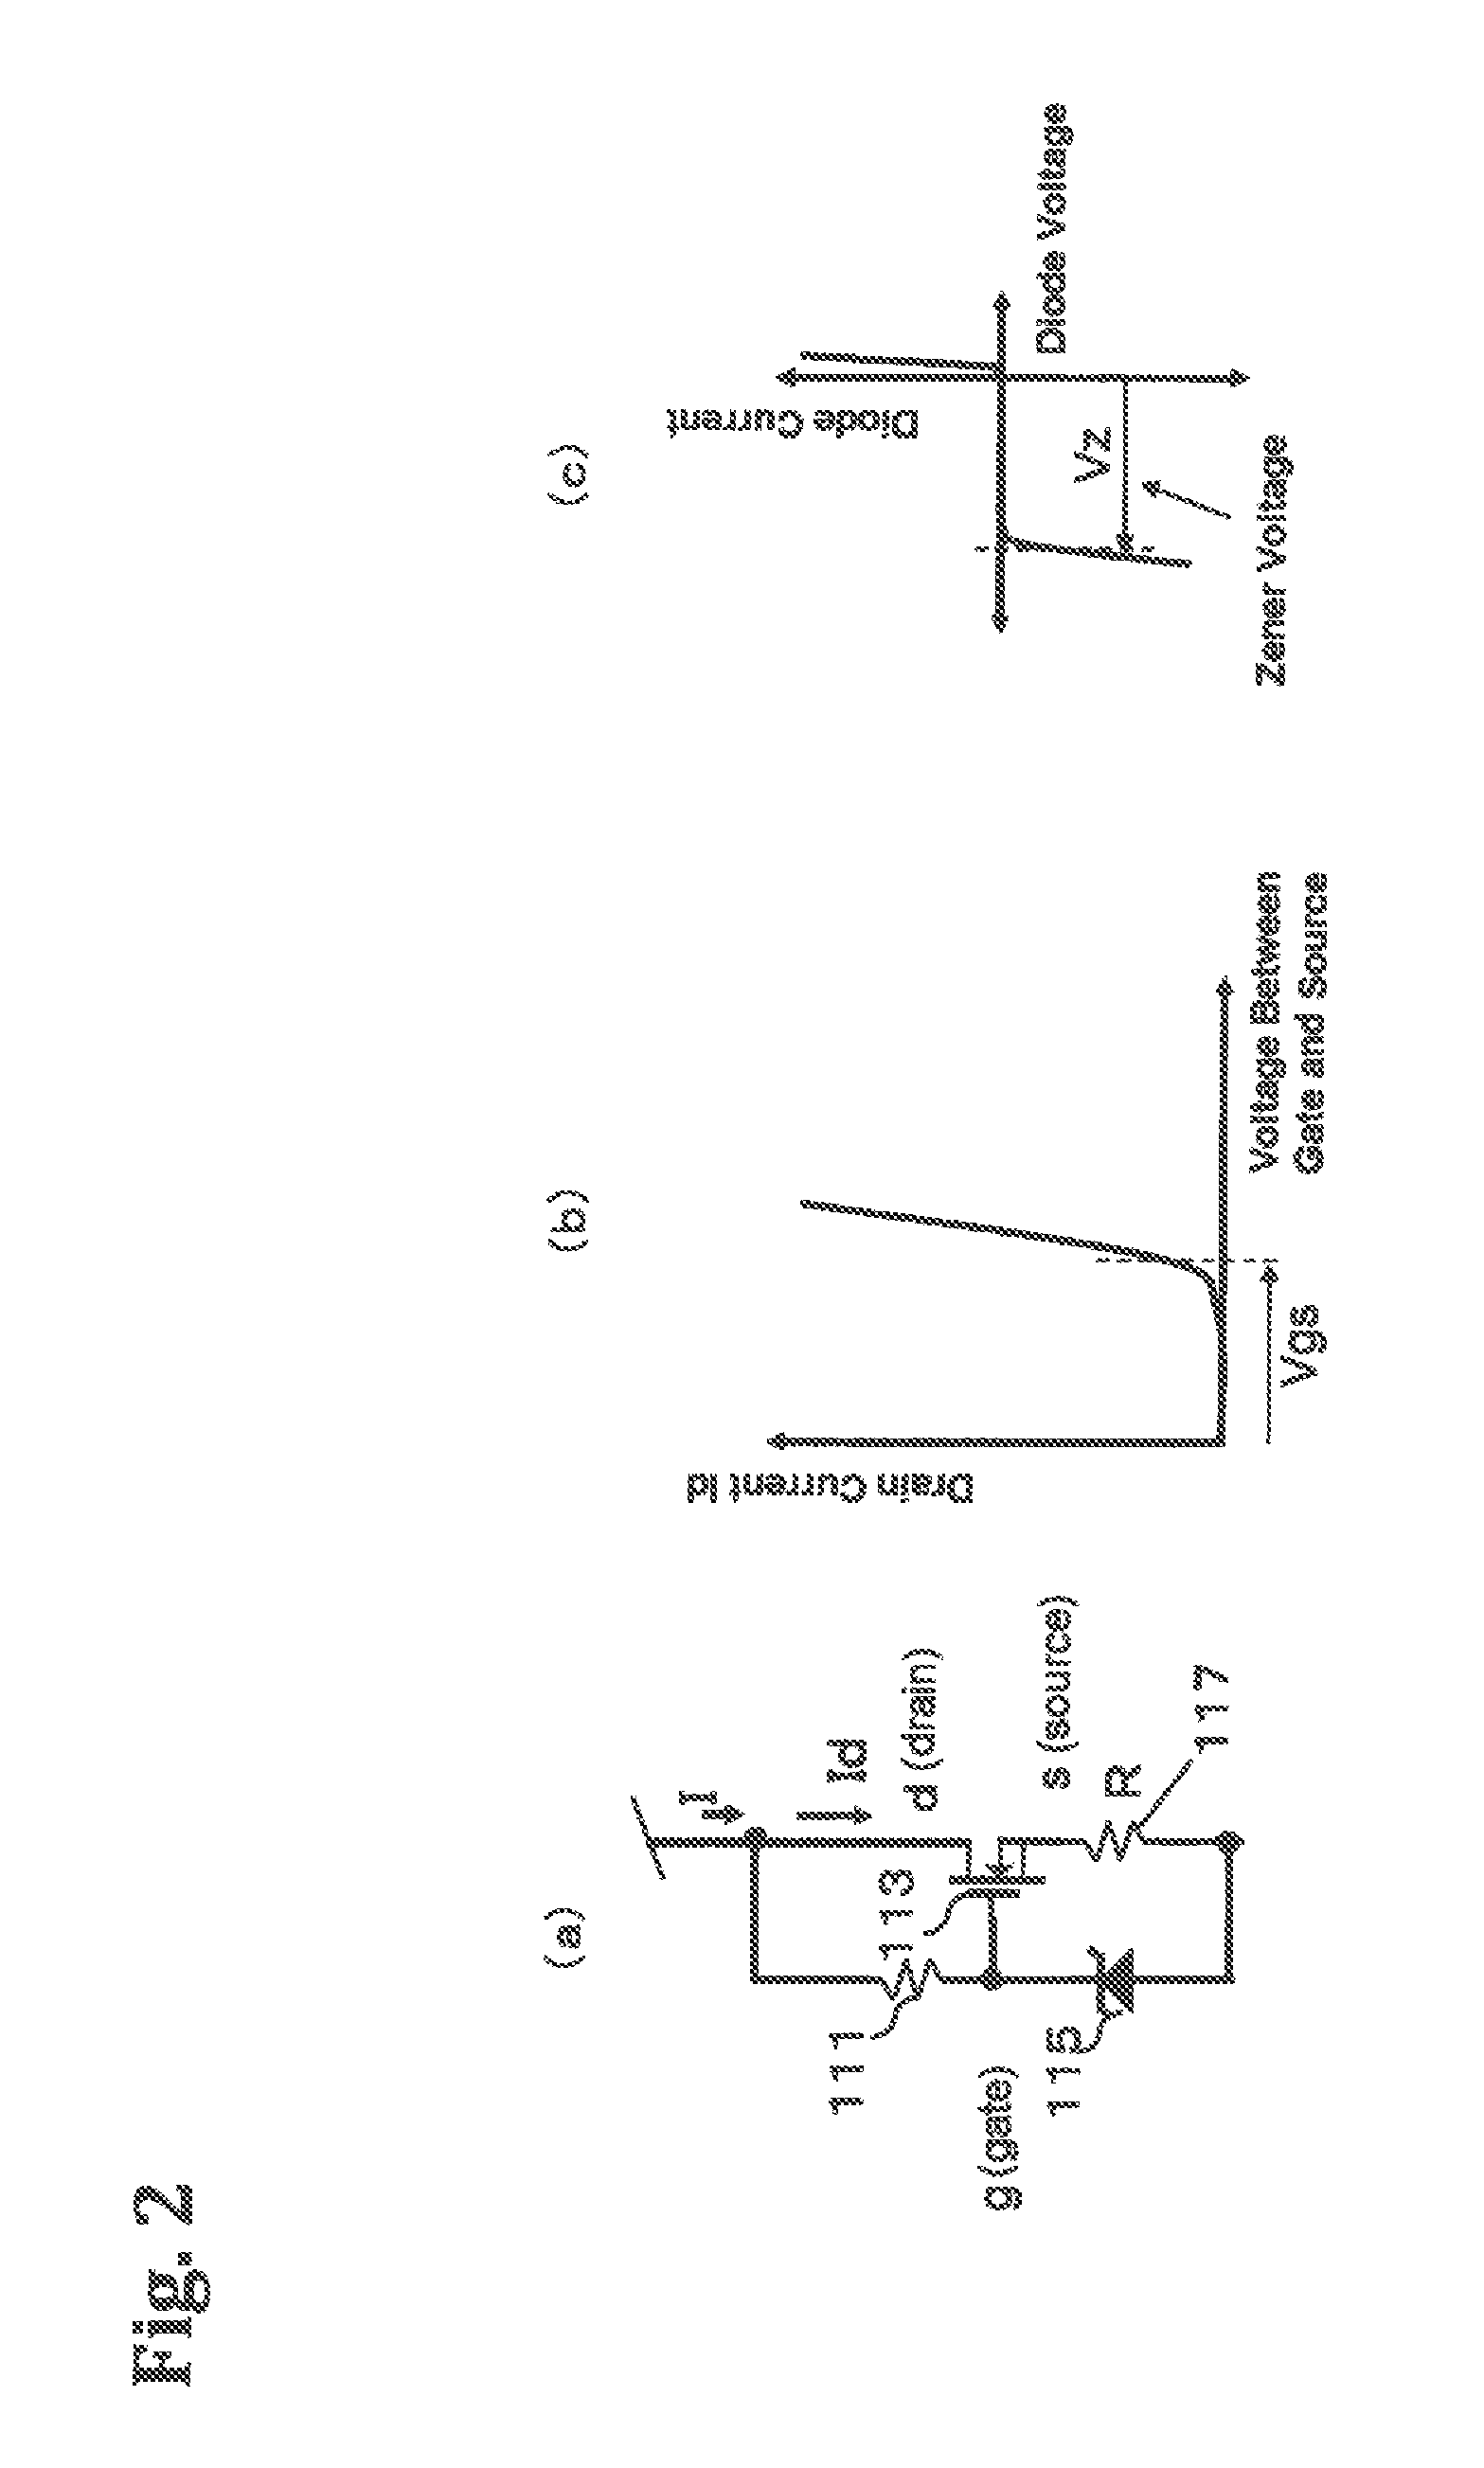 Direct-current stabilized power supply device